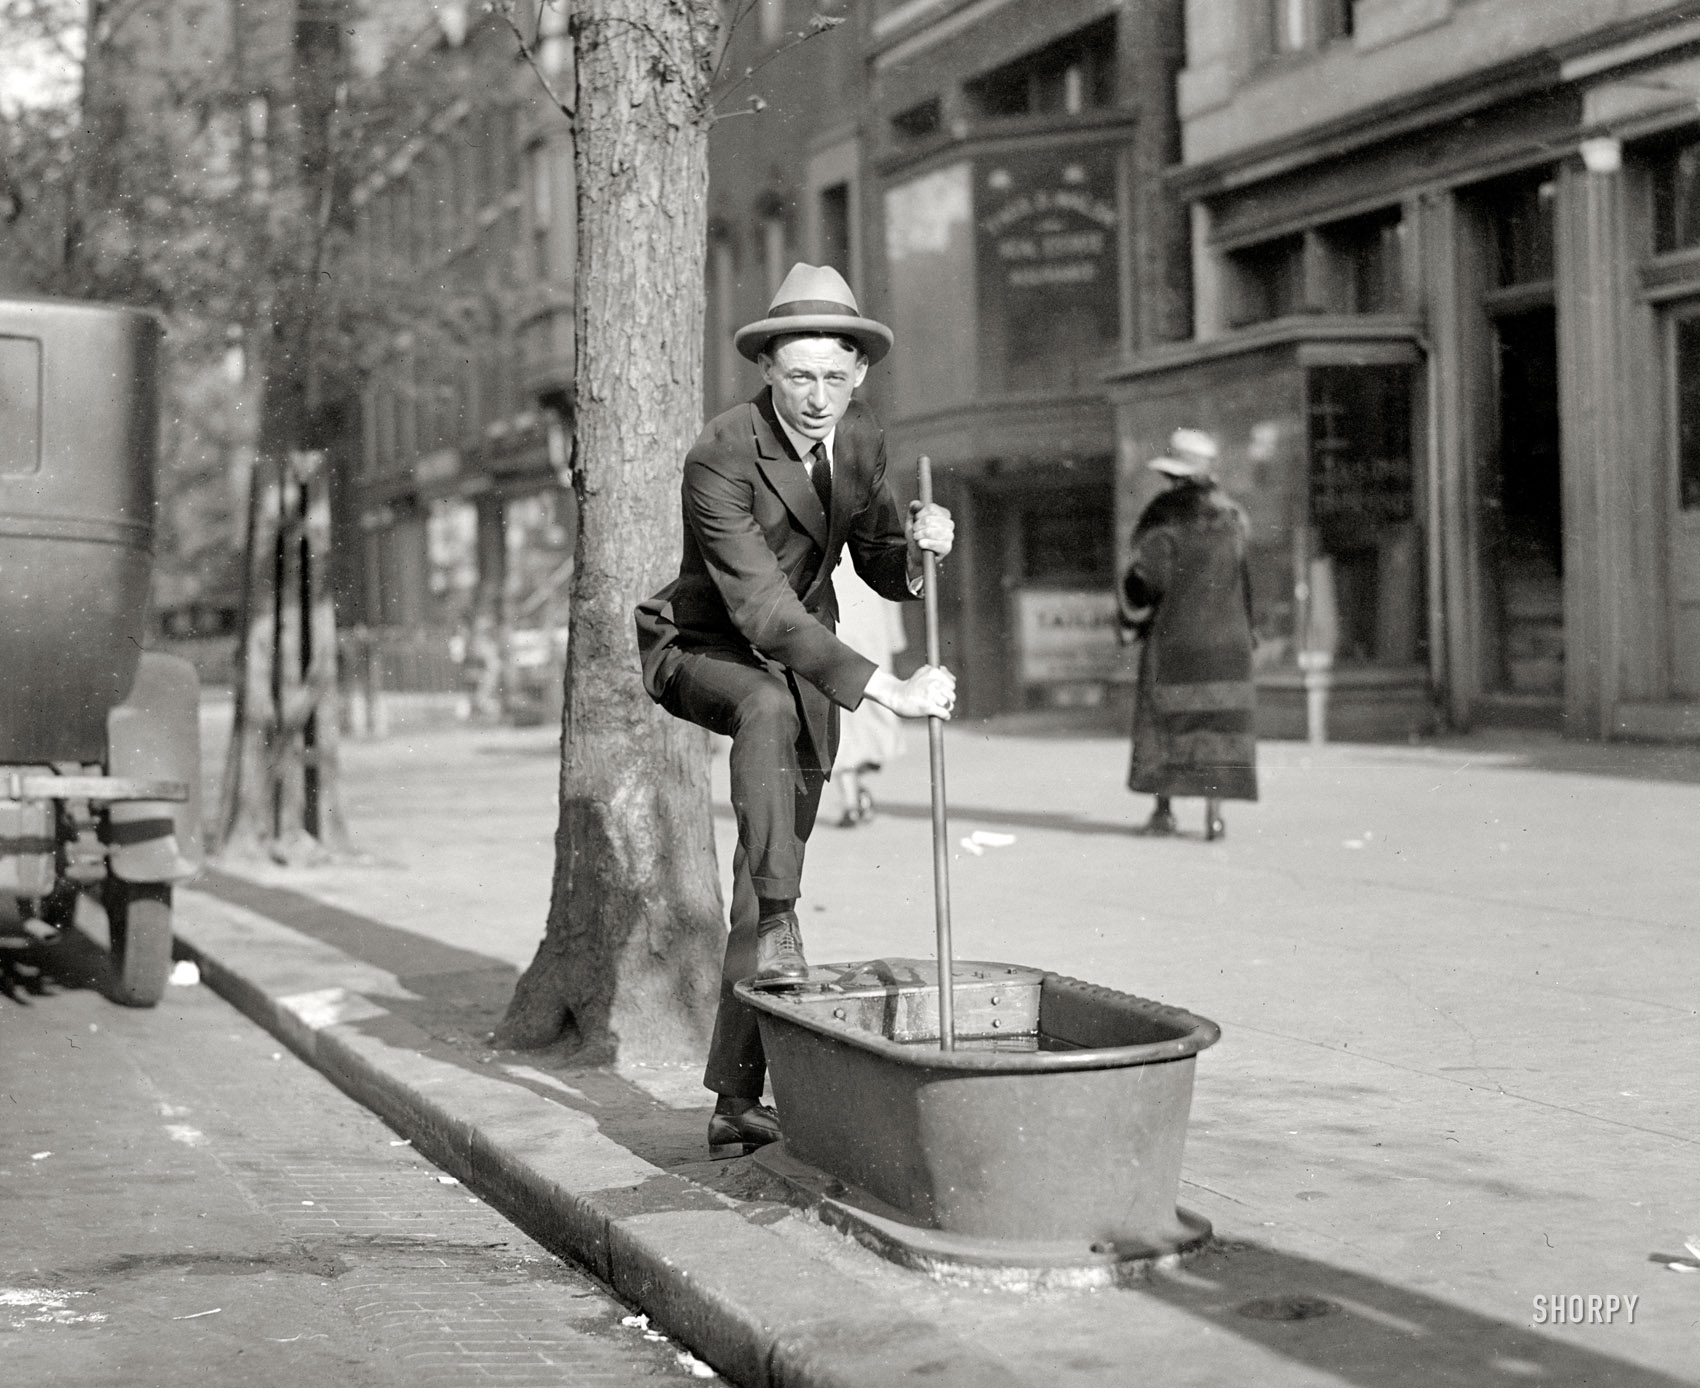 Washington Post staff photographer Hugh Miller in 1924, clowning with an item that, along with lampposts and mailboxes, used to be common piece of urban street furniture: the sidewalk horse-waterer. National Photo Co. View full size.